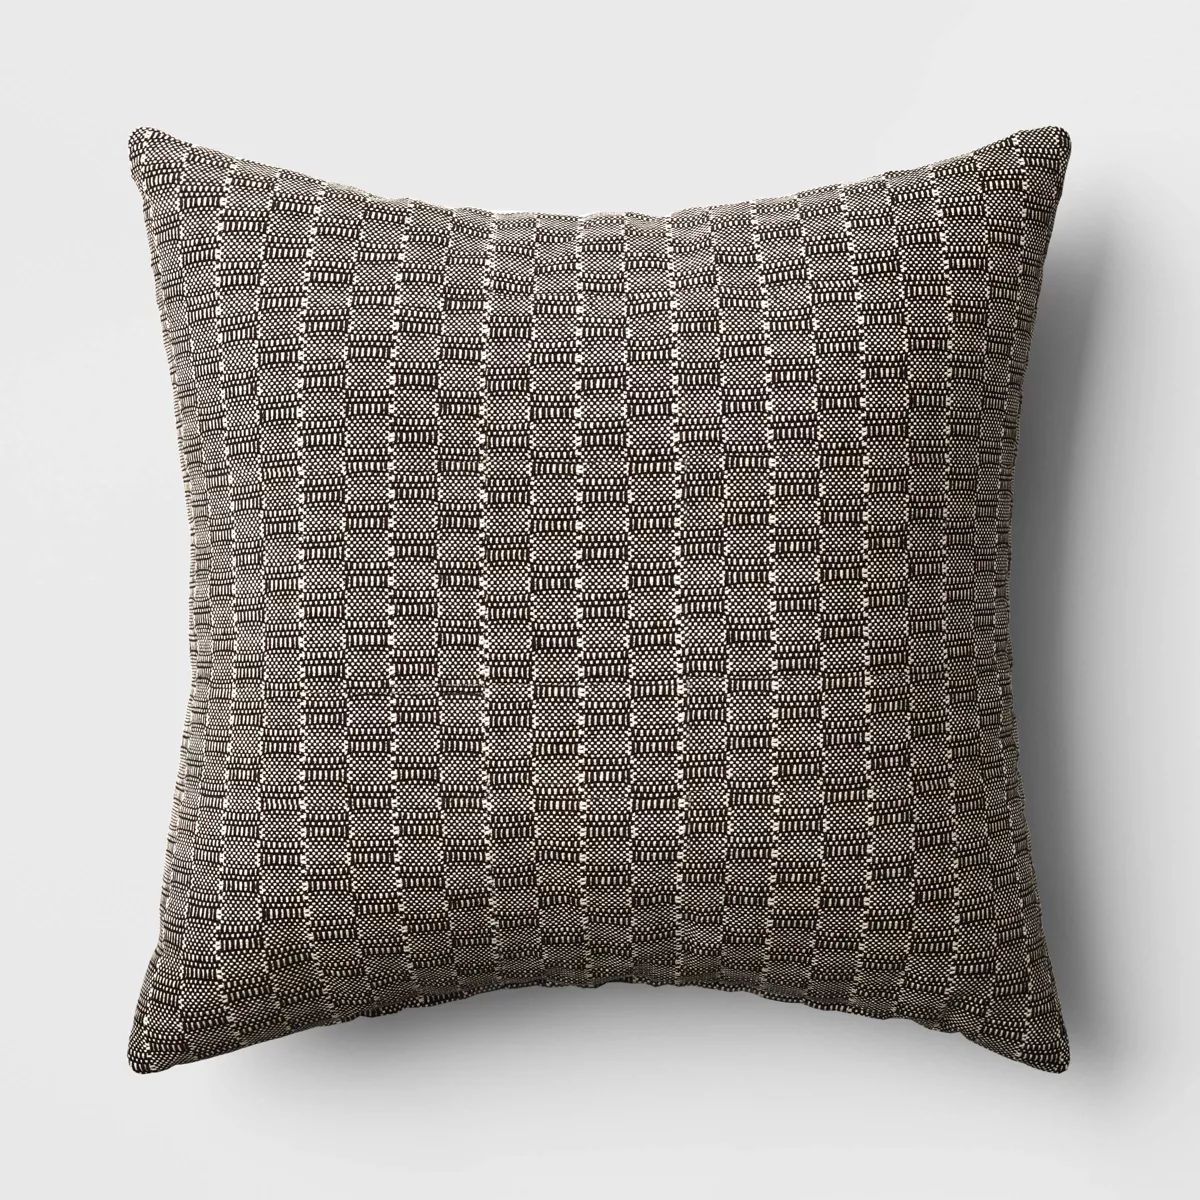 Oversized Textural Woven Square Throw Pillow Black/Neutral - Threshold™ | Target